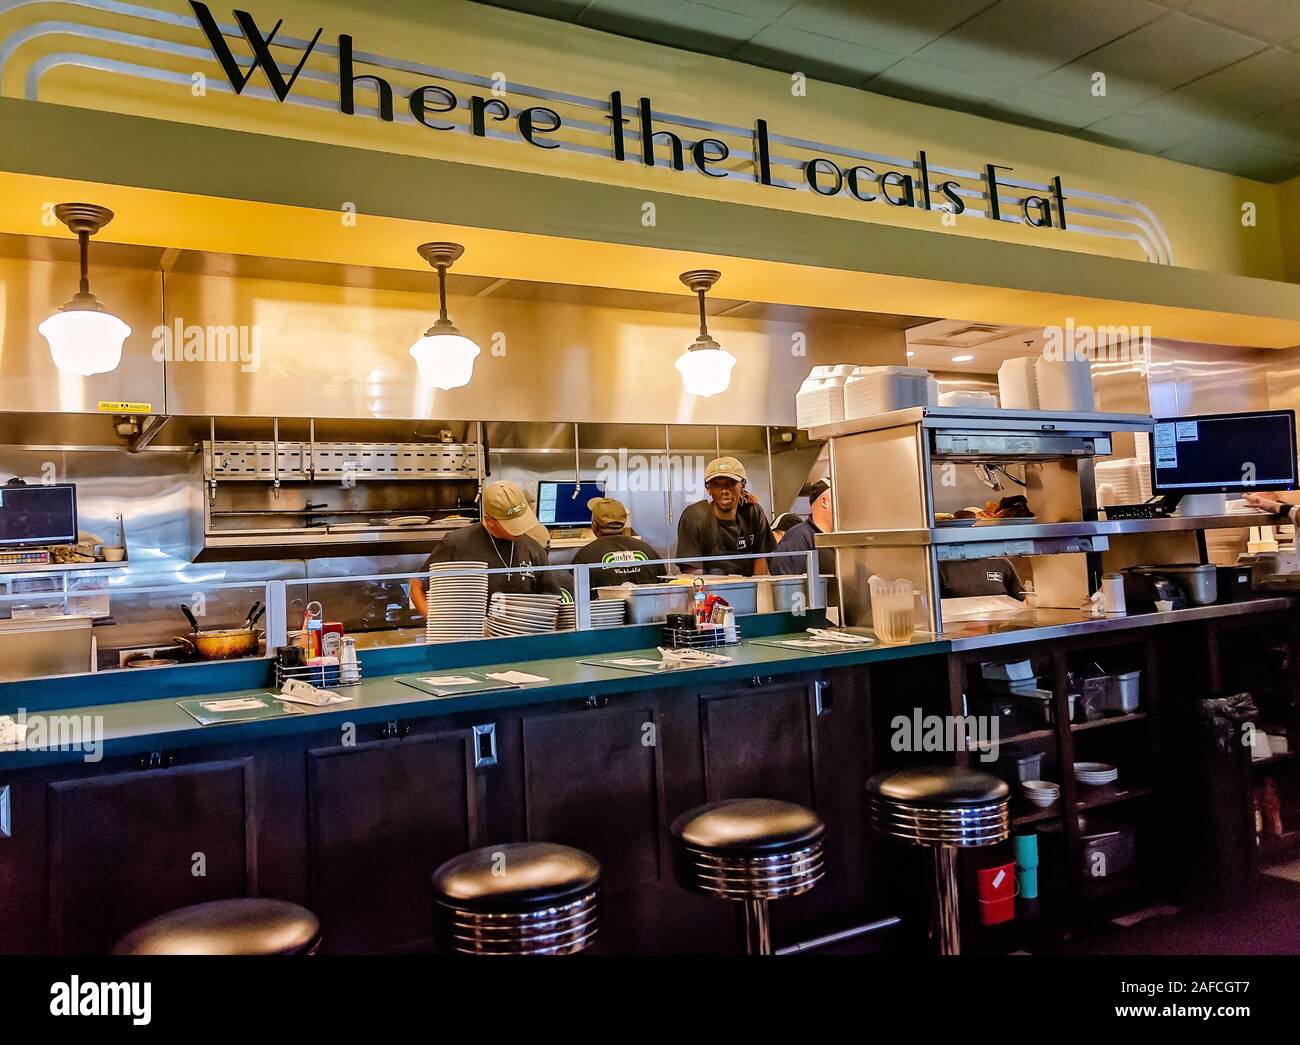 Cooks prepare food in the kitchen beneath a sign that states, “Where the locals eat,” at Metro Diner, July 29, 2018, in Huntsville, Alabama. Stock Photo